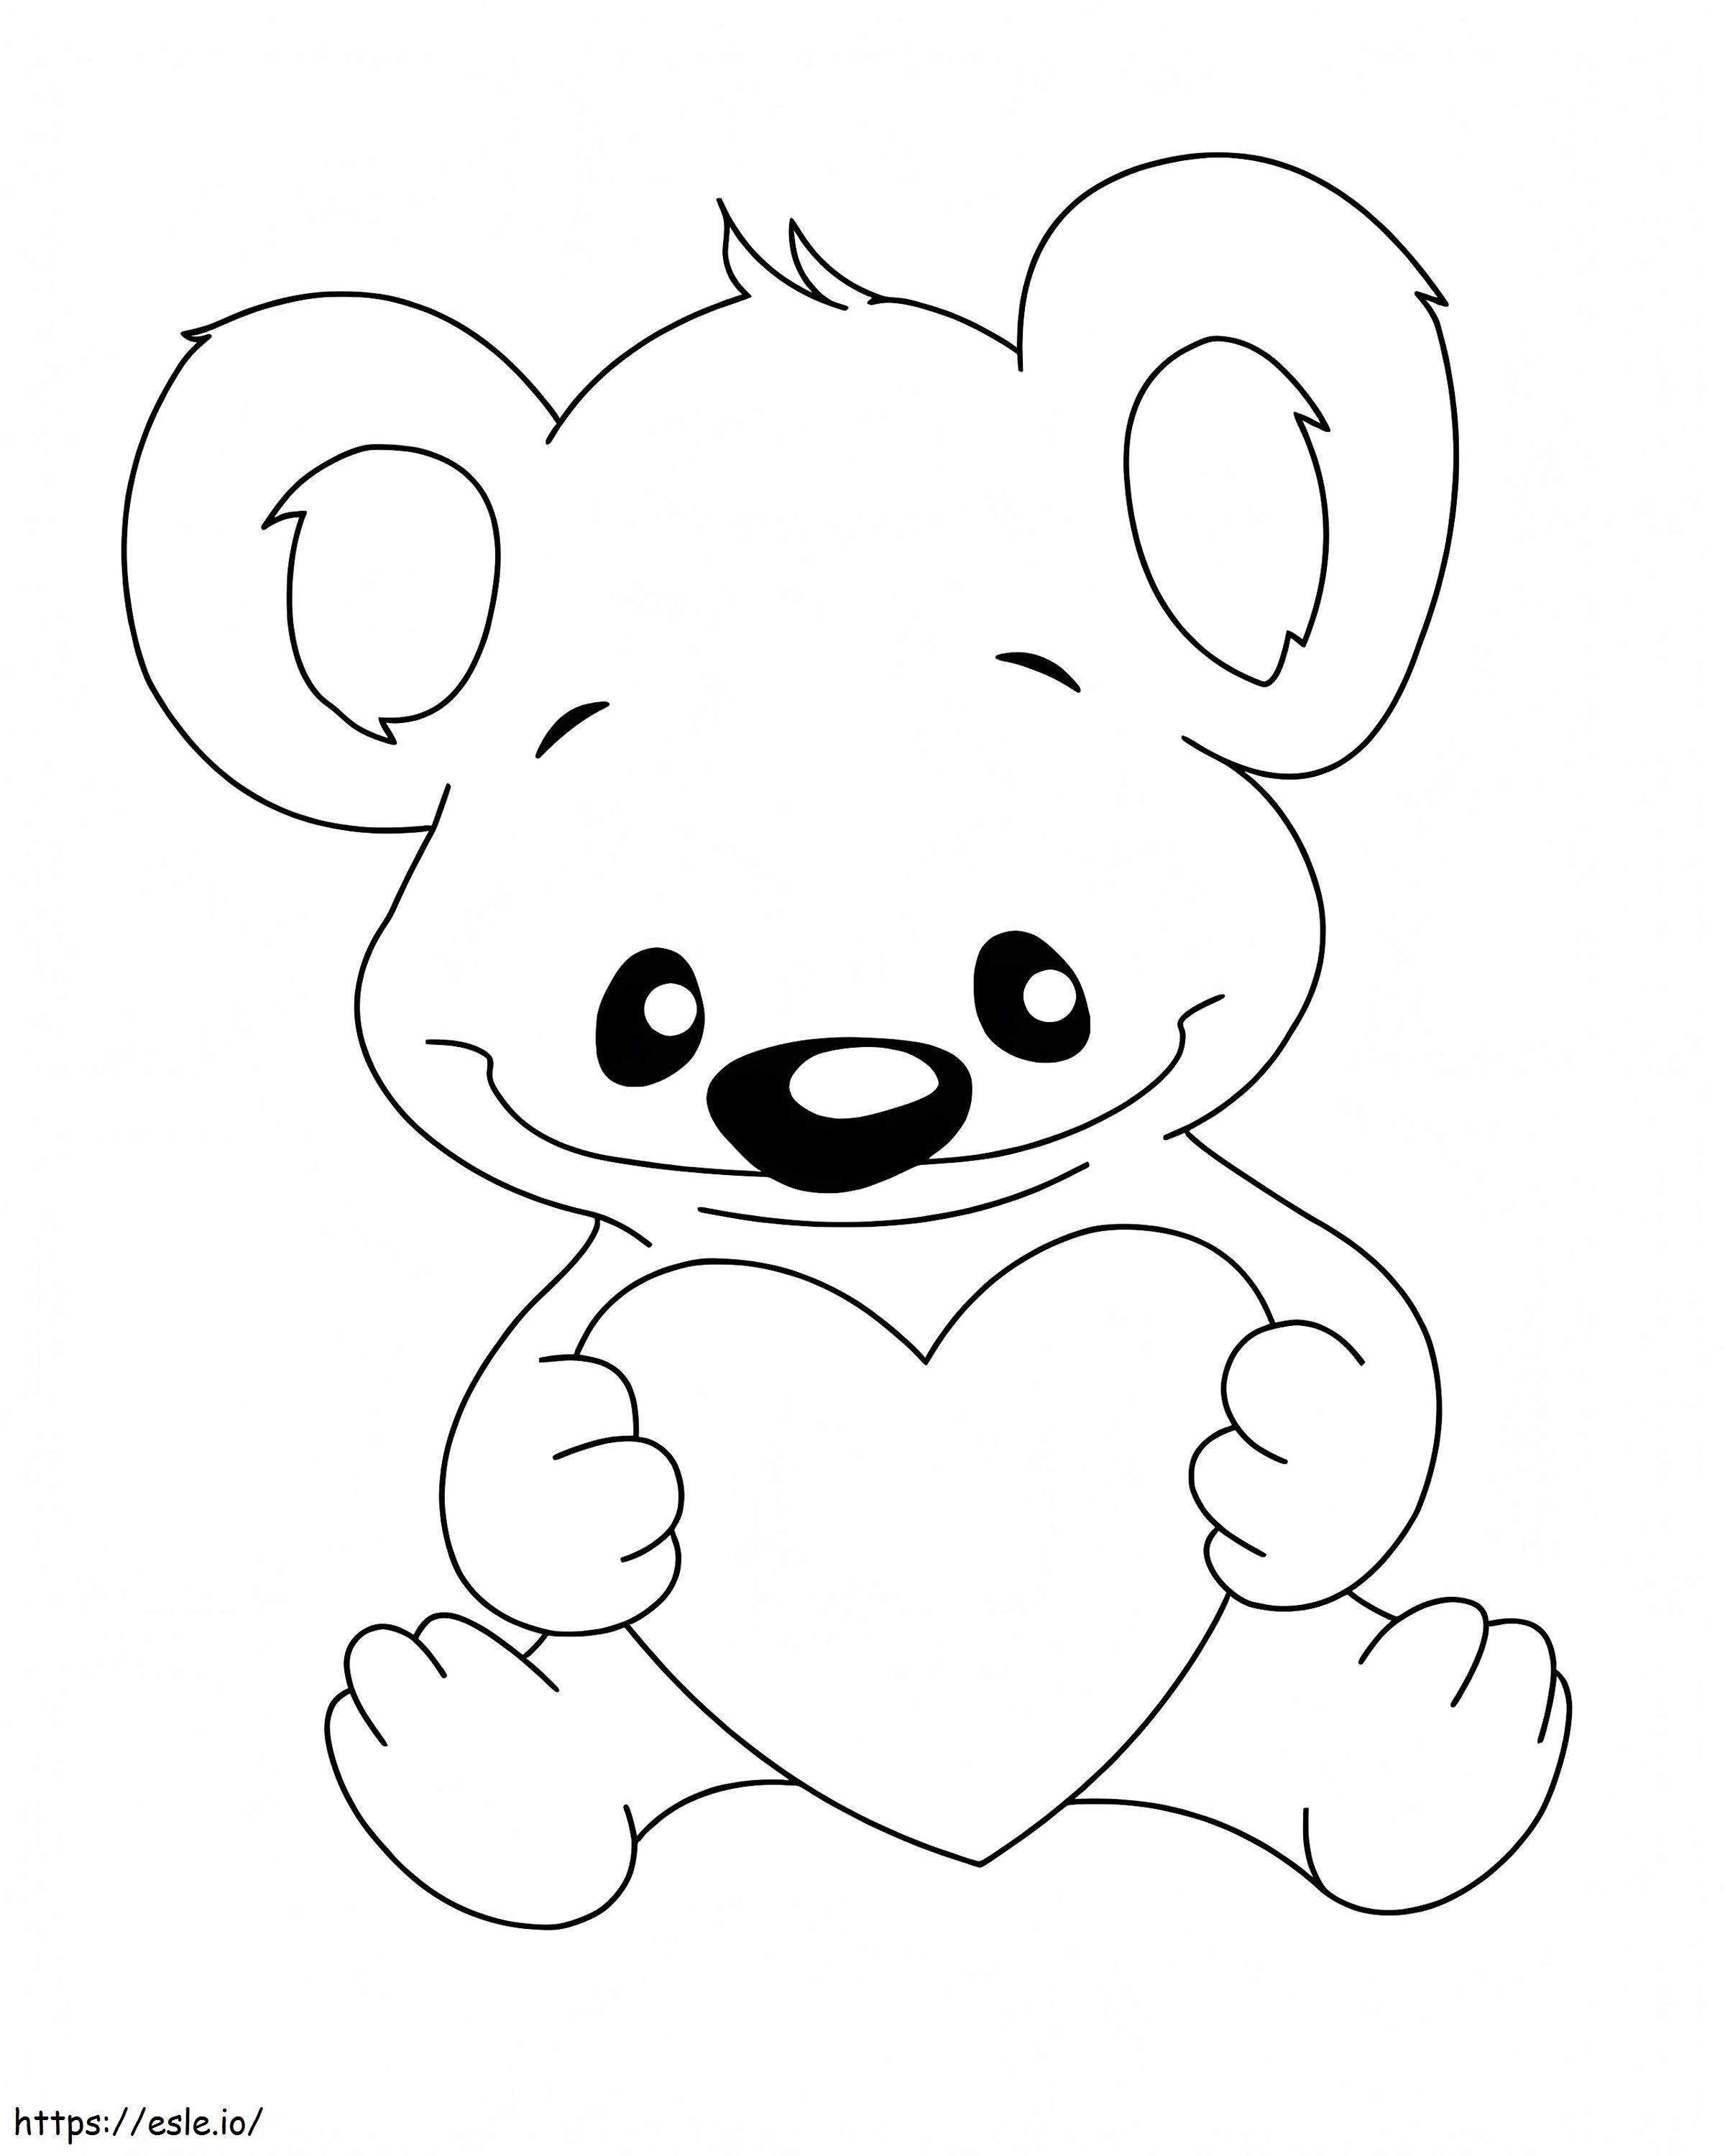 Koala With Heart coloring page